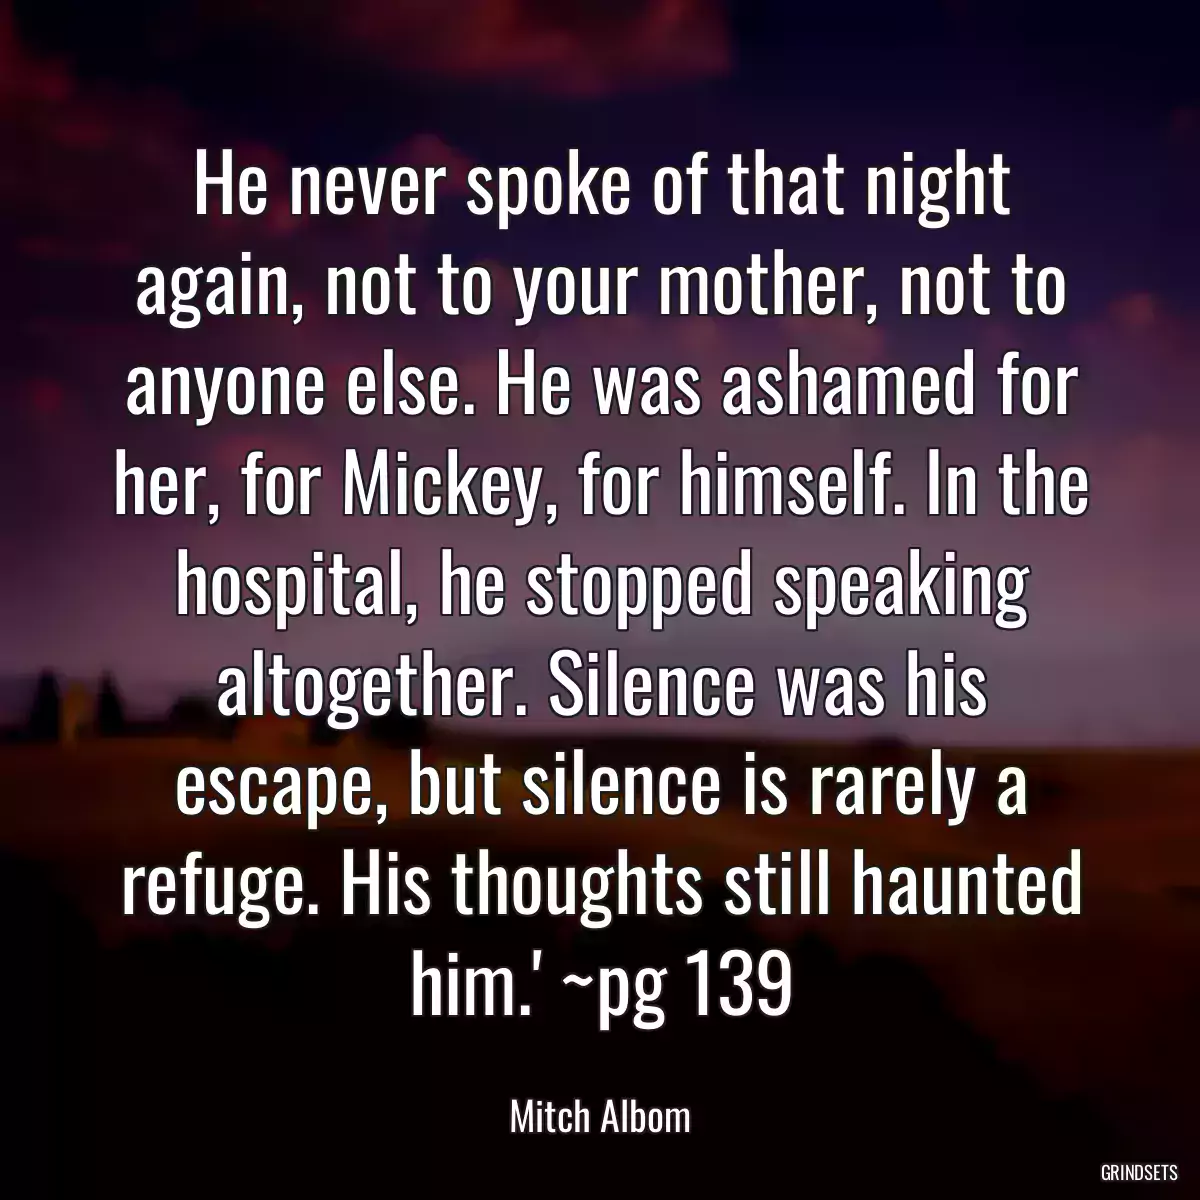 He never spoke of that night again, not to your mother, not to anyone else. He was ashamed for her, for Mickey, for himself. In the hospital, he stopped speaking altogether. Silence was his escape, but silence is rarely a refuge. His thoughts still haunted him.\' ~pg 139